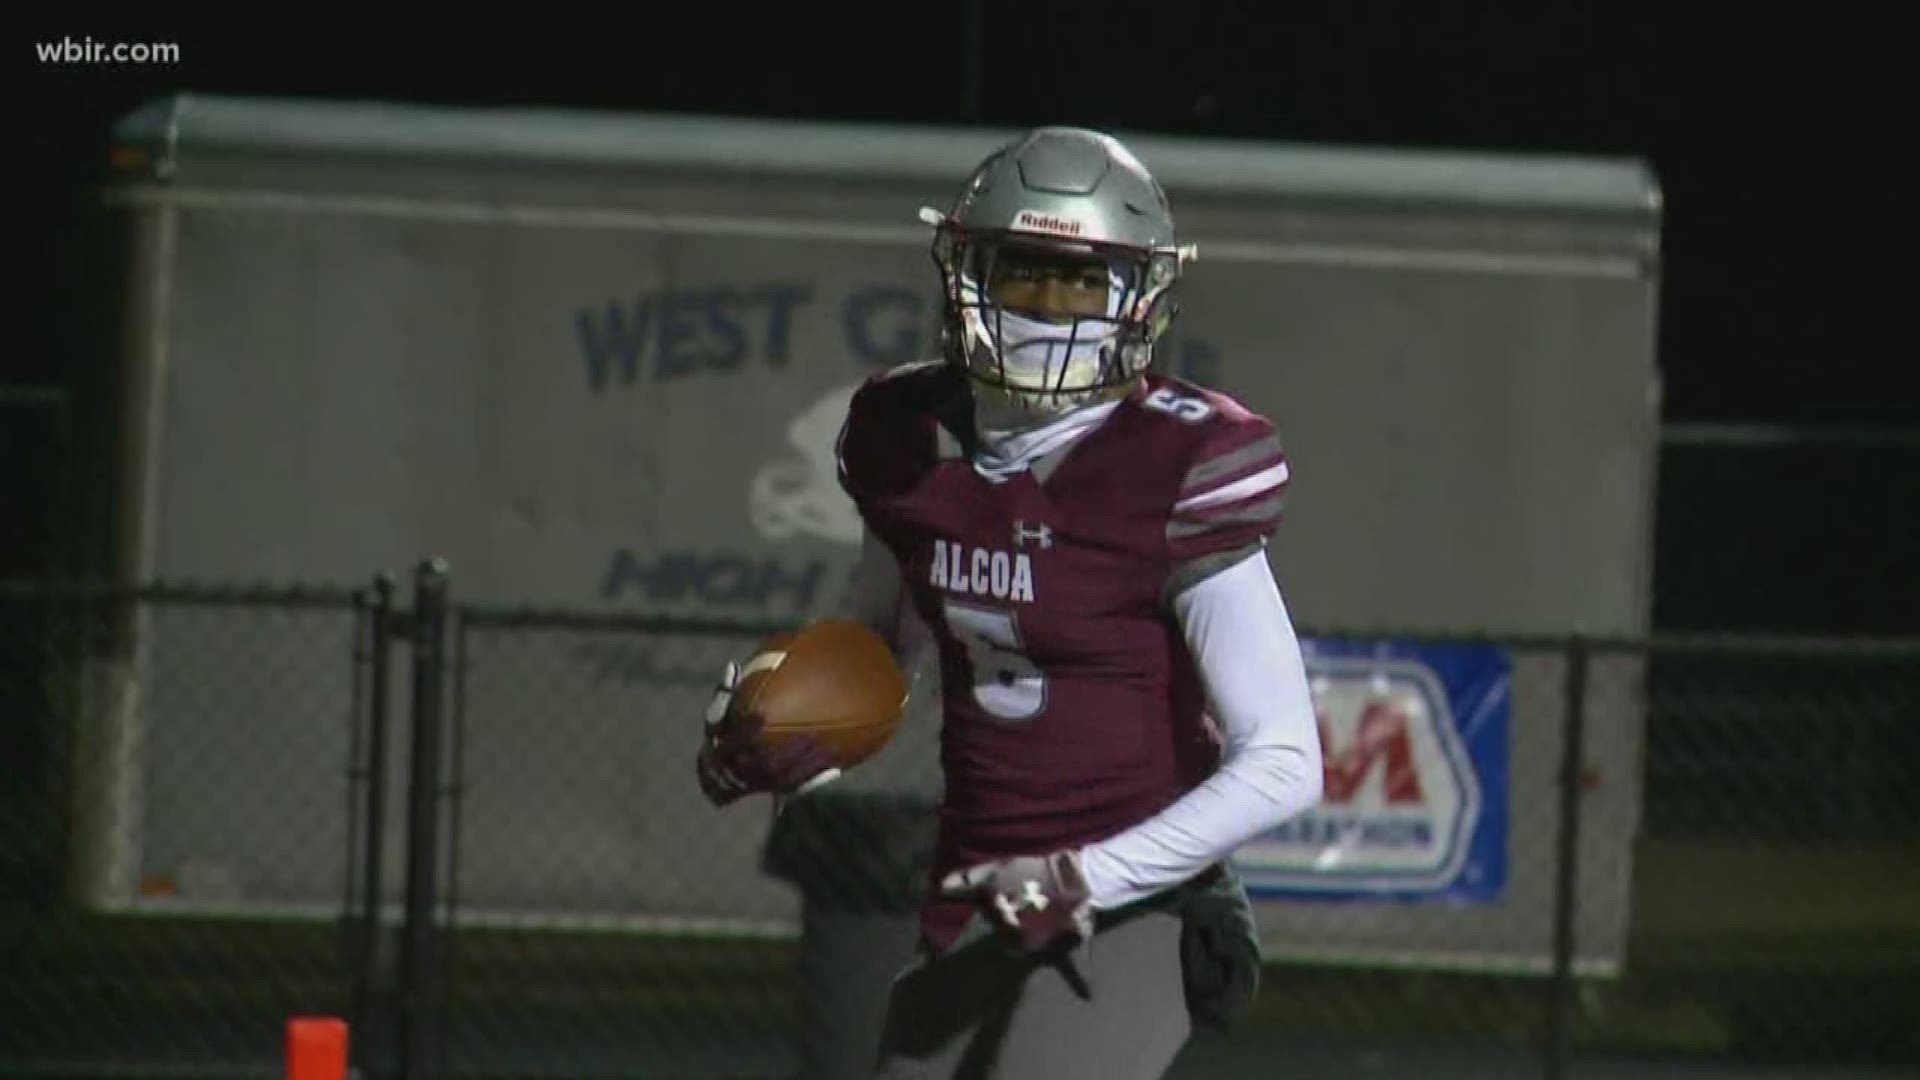 Alcoa wins big over West Greene in round one of the playoffs.